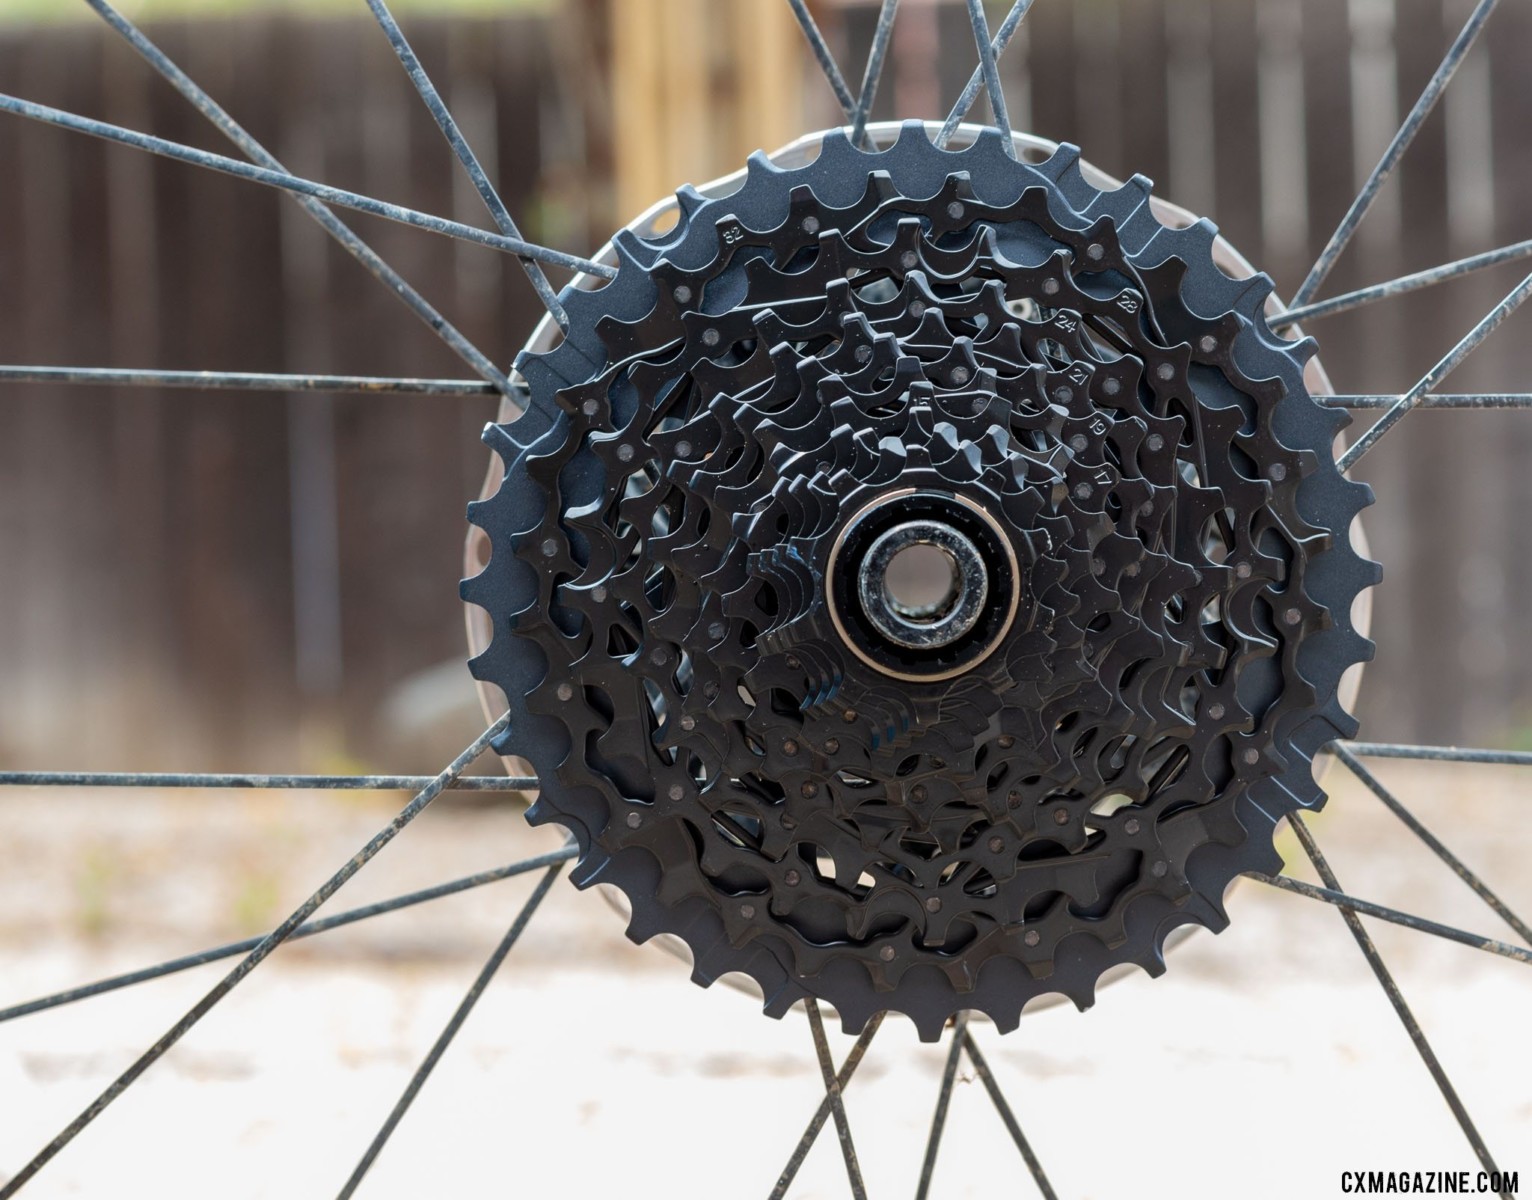 The new wide-range SRAM Force AXS eTap 10-36t cassette is XD-R only. © Cyclocross Magazine